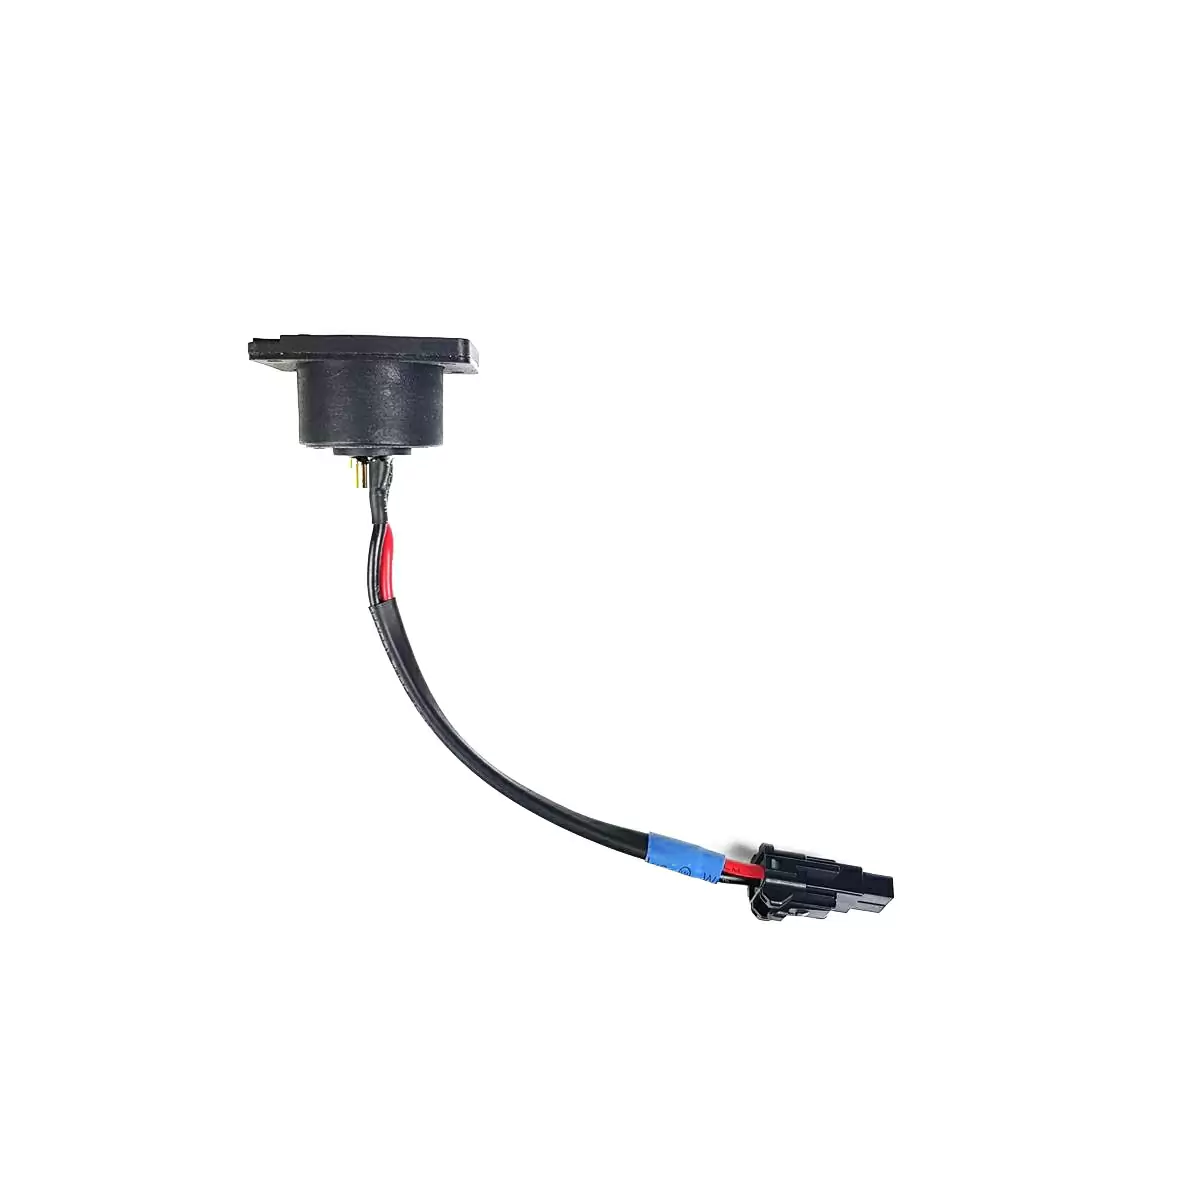 Replacement charging port 1977005EDS for Powerplay models - image